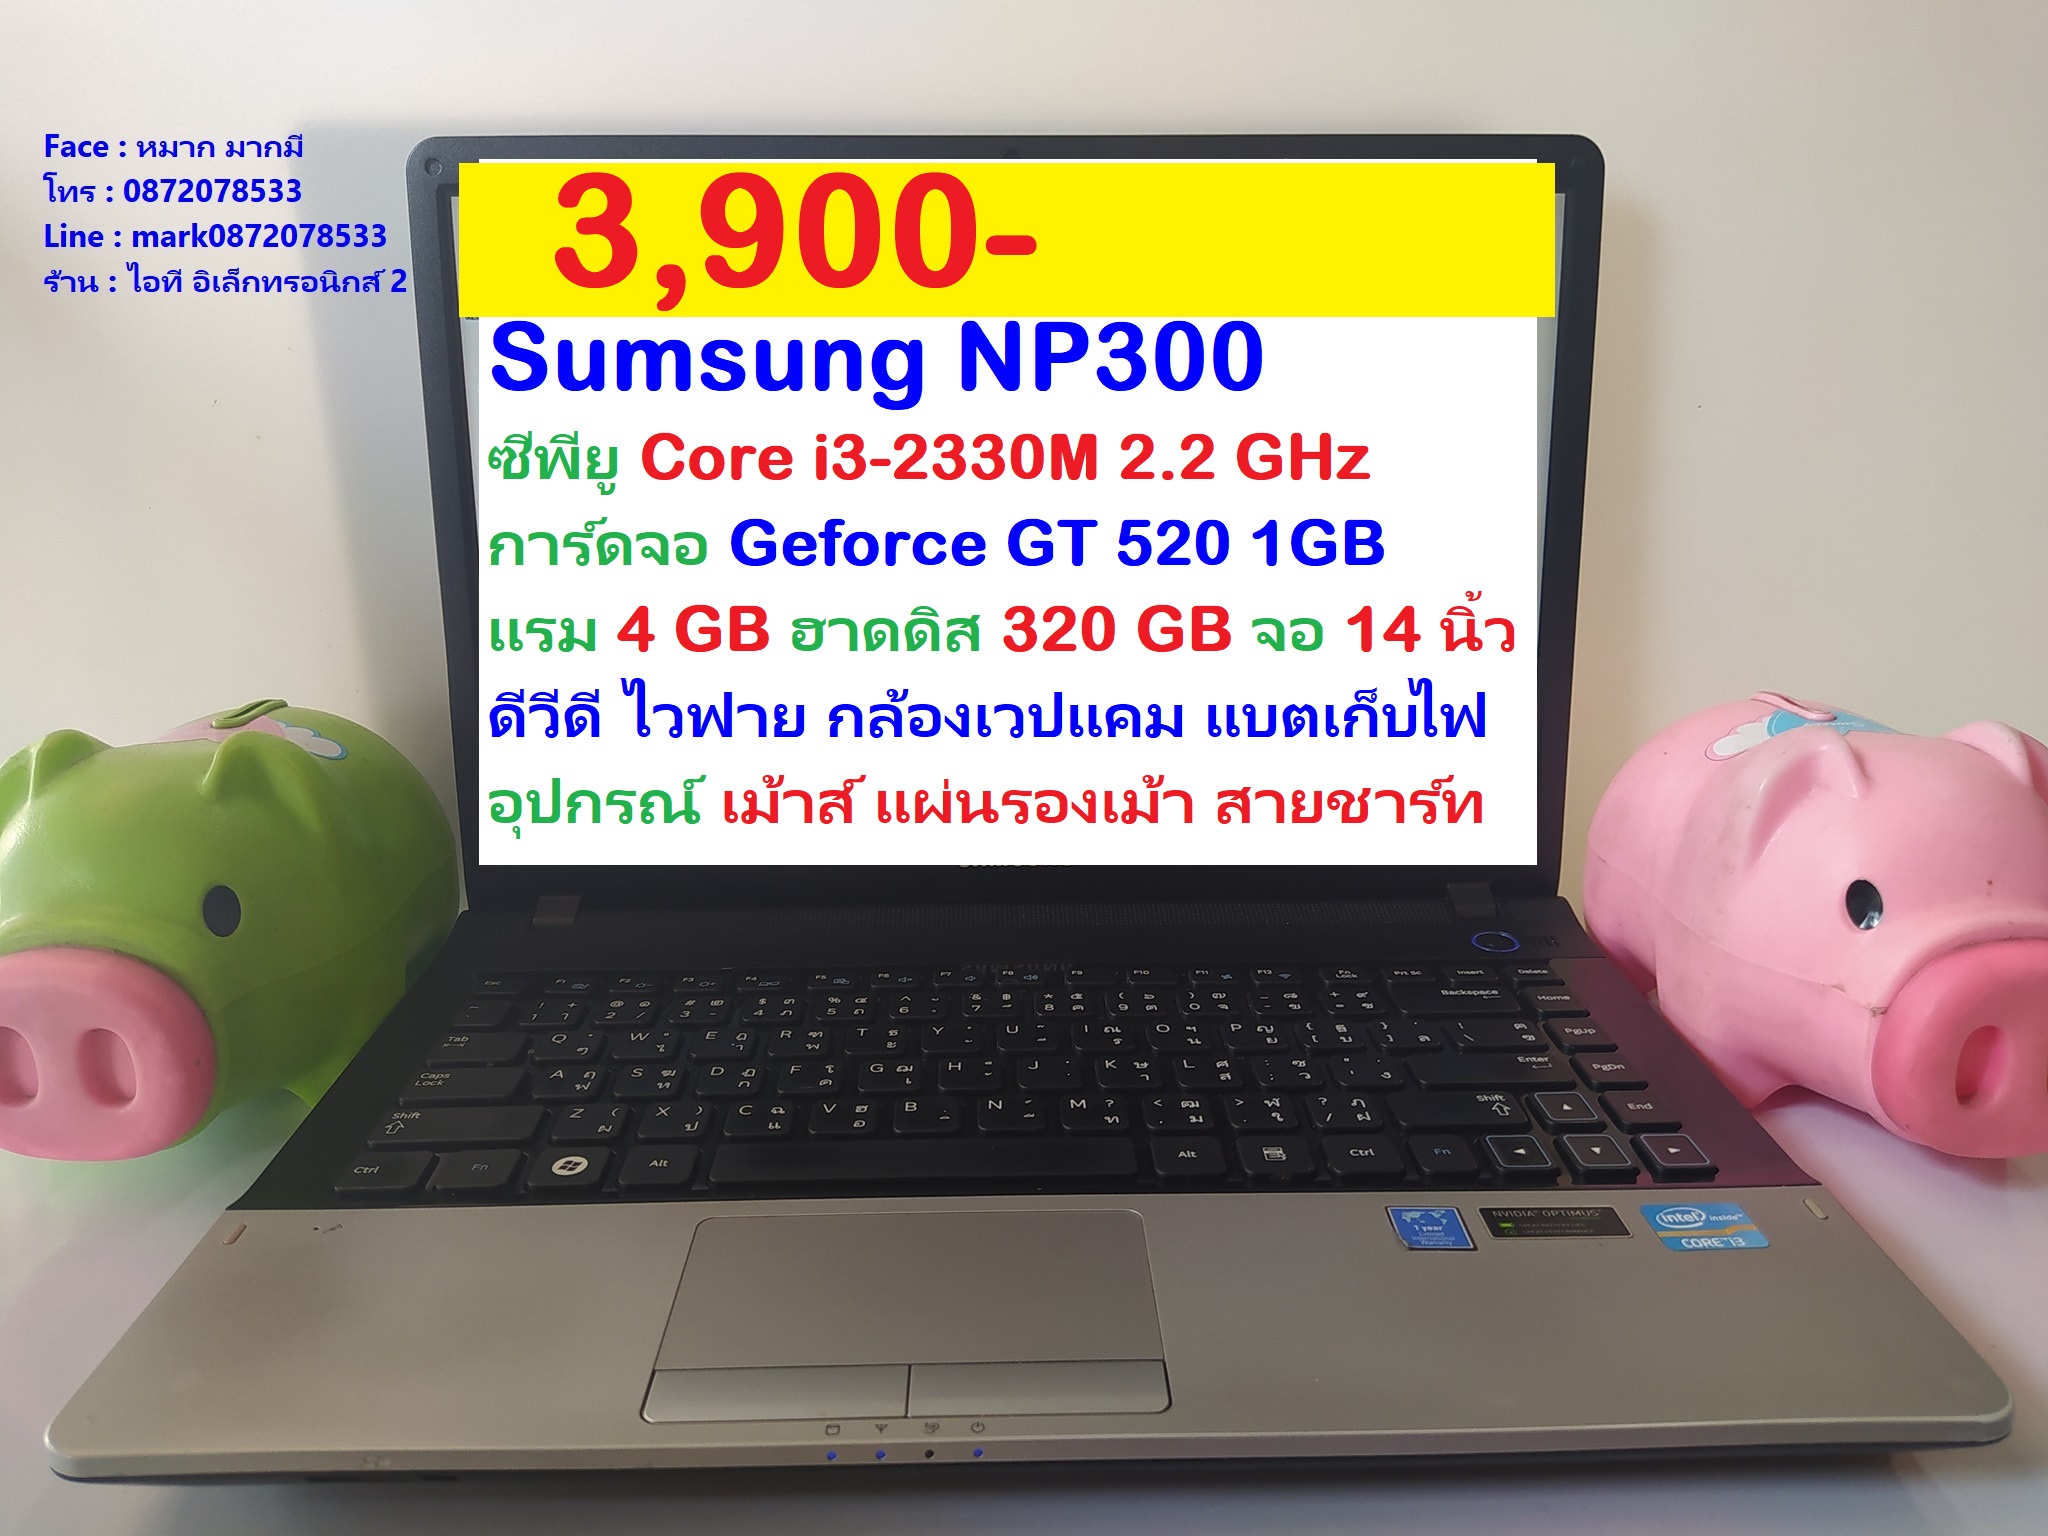 Sumsung NP300 รูปที่ 1